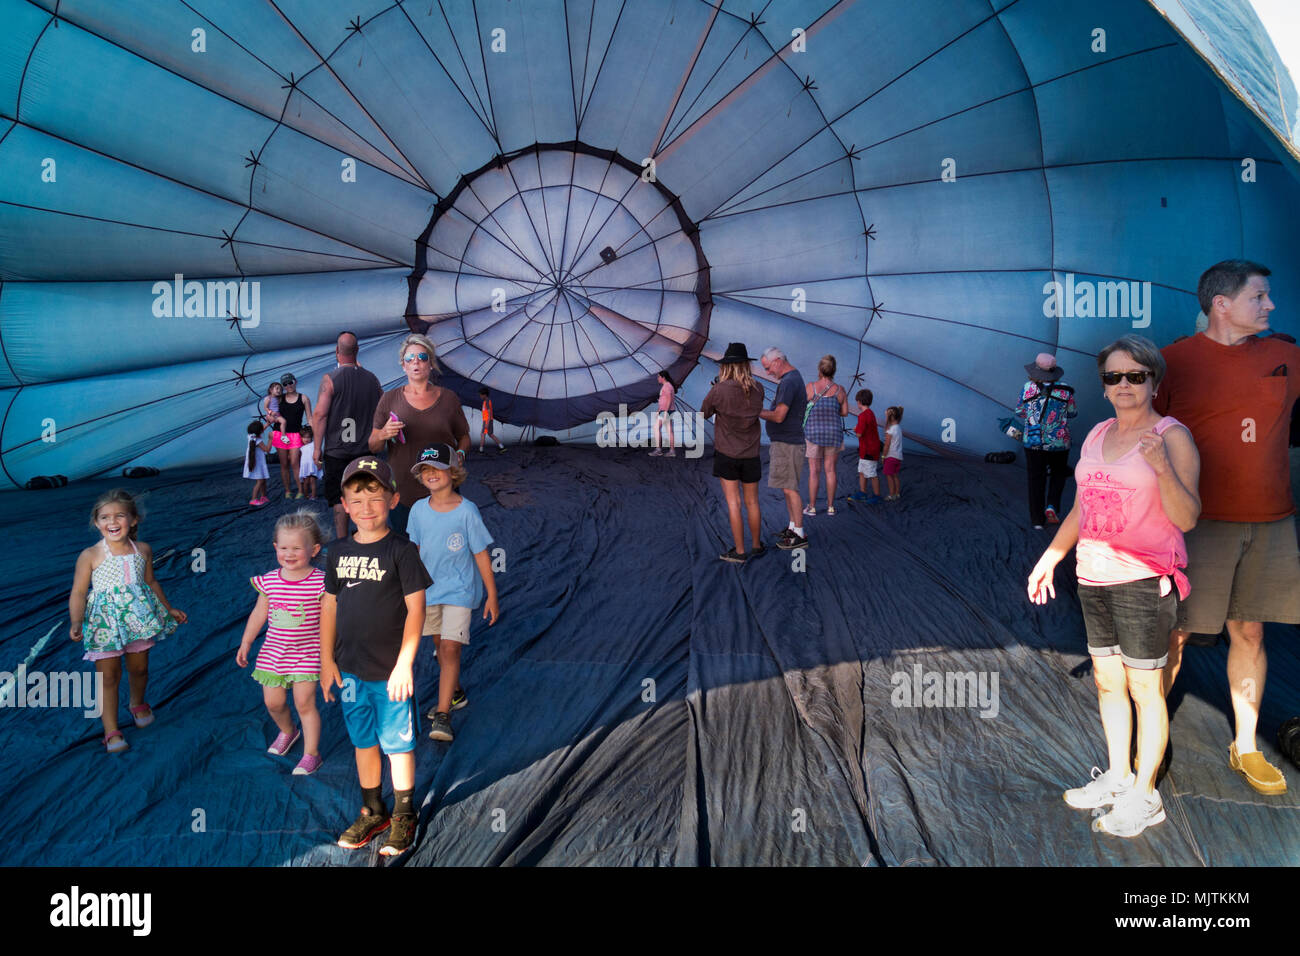 People exploring the inside of a partially inflated hot air balloon at the 14th annual Hot Air Balloon Festival at Foley, Alabama. Stock Photo